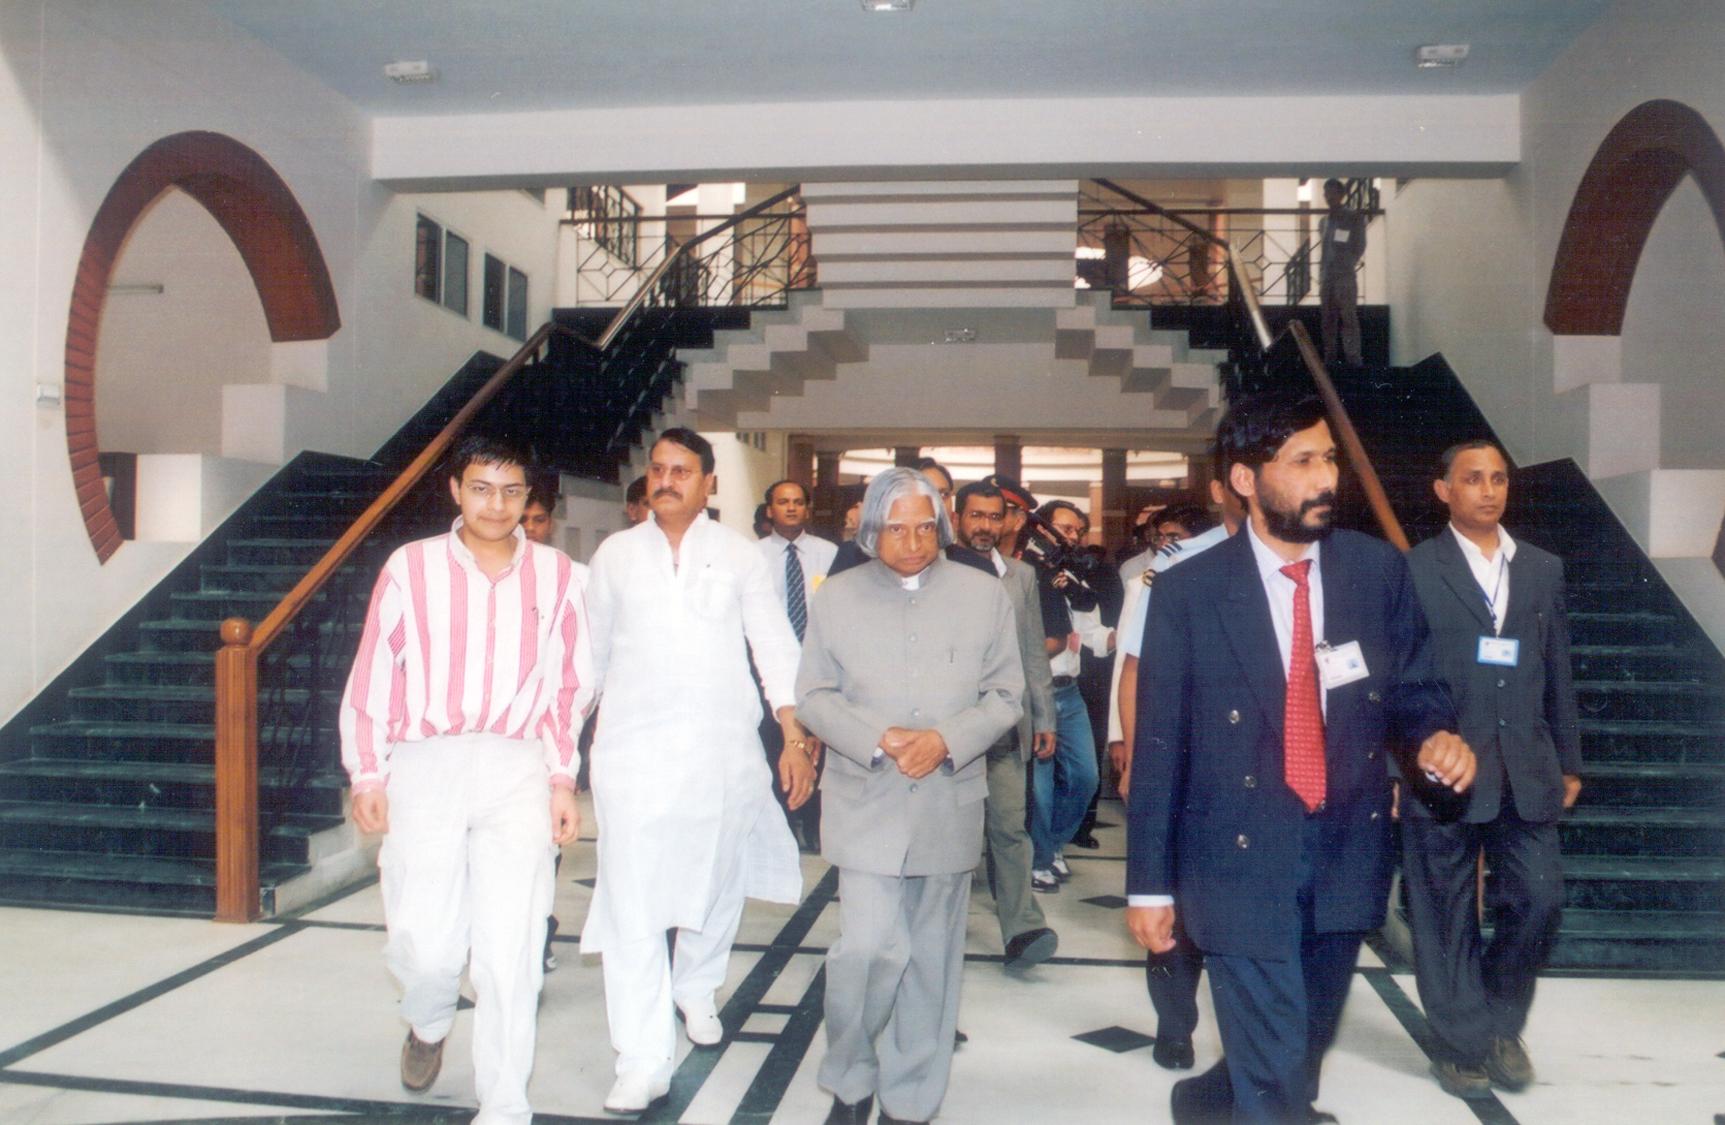 His Excellency the President of India Dr. A. P. J. Abdul Kalam, during his visit to Library,
BITS Pilani, Pilani Campus on 30 March 2007.